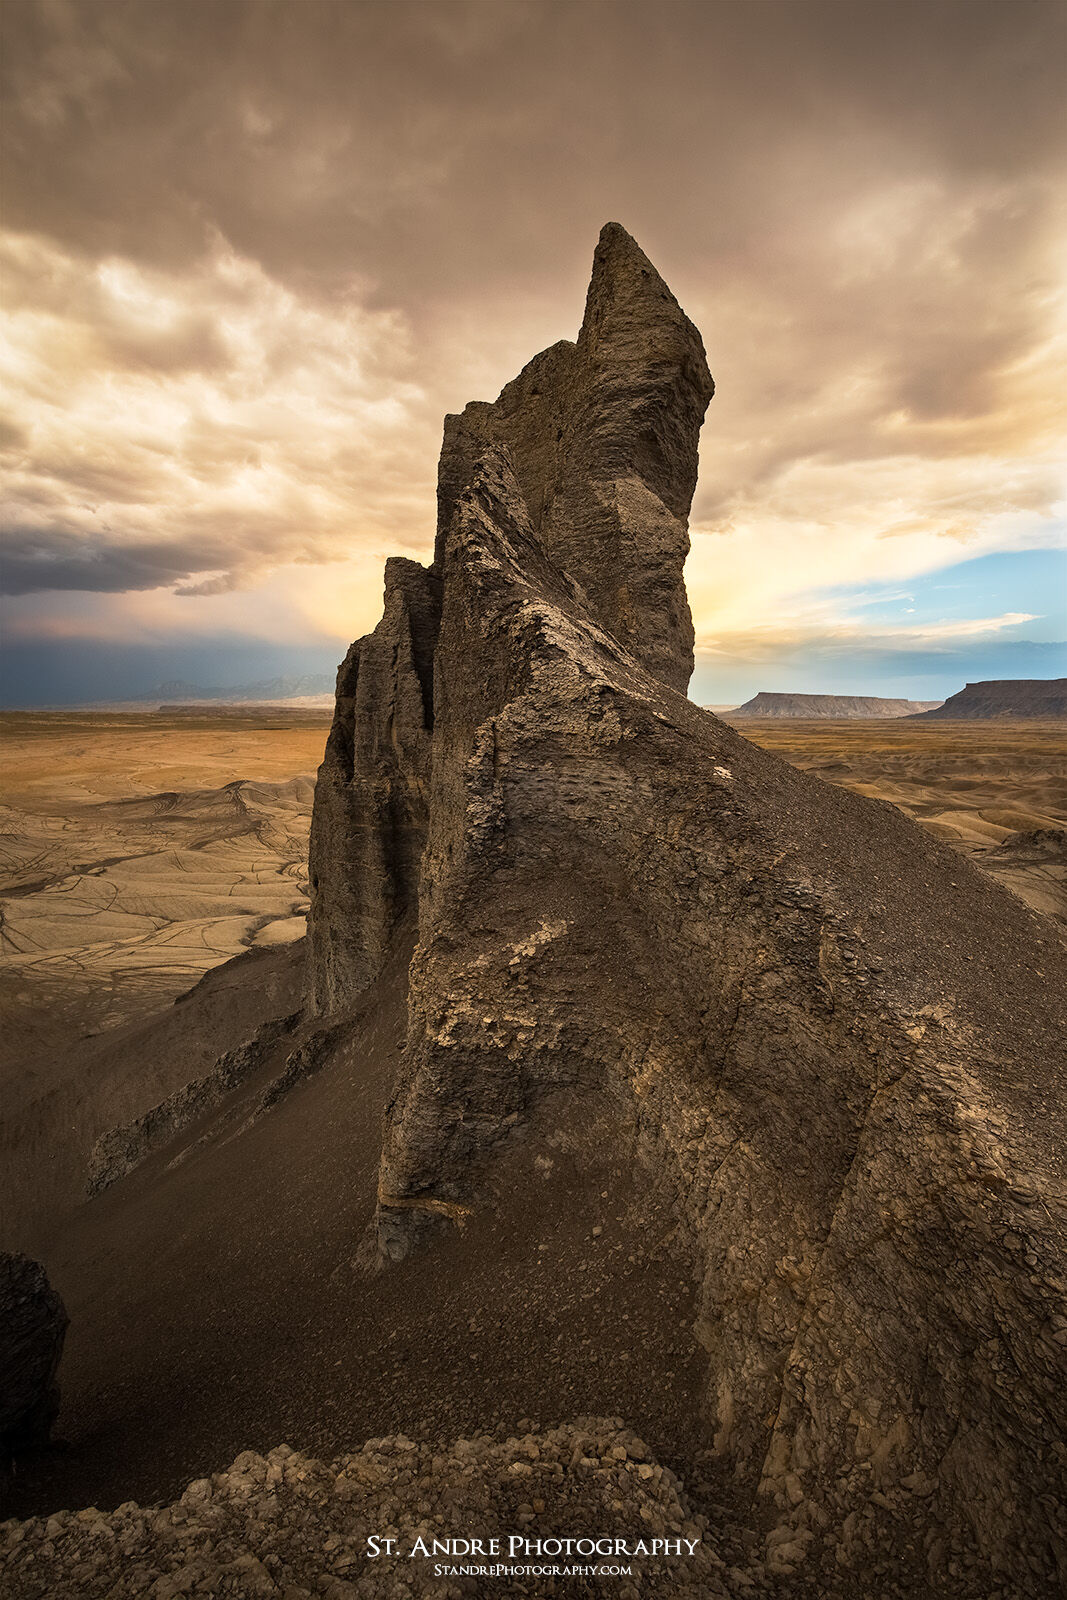 A dark stony tower located near Hanksville, Utah. This sits in the badlands that surround Factory Butte in Southern Utah. 